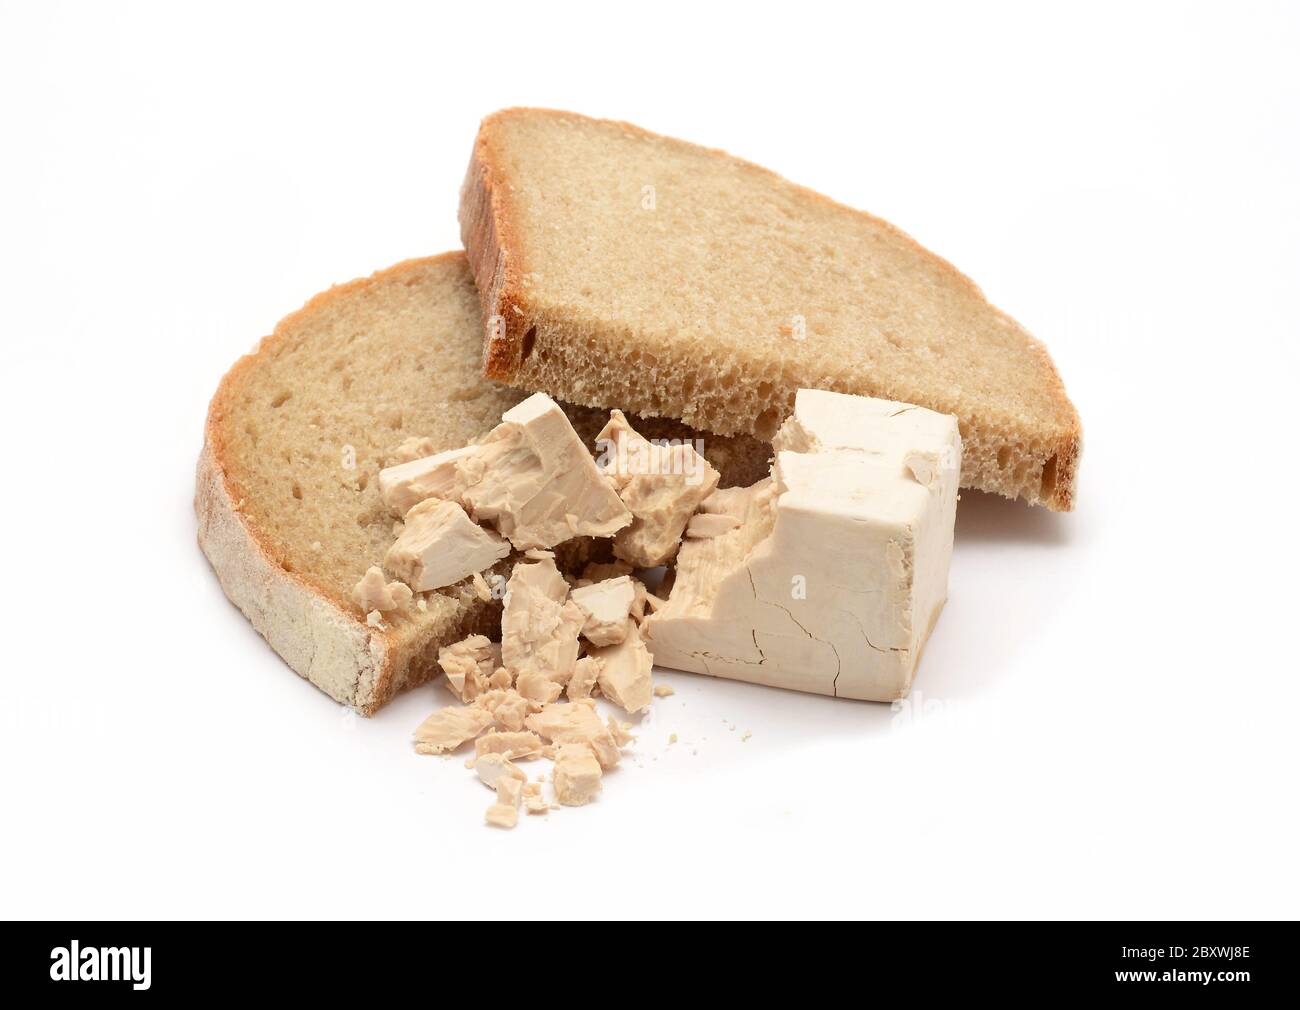 Fresh yeast block crumbled on two slices of bread over white background. Stock Photo